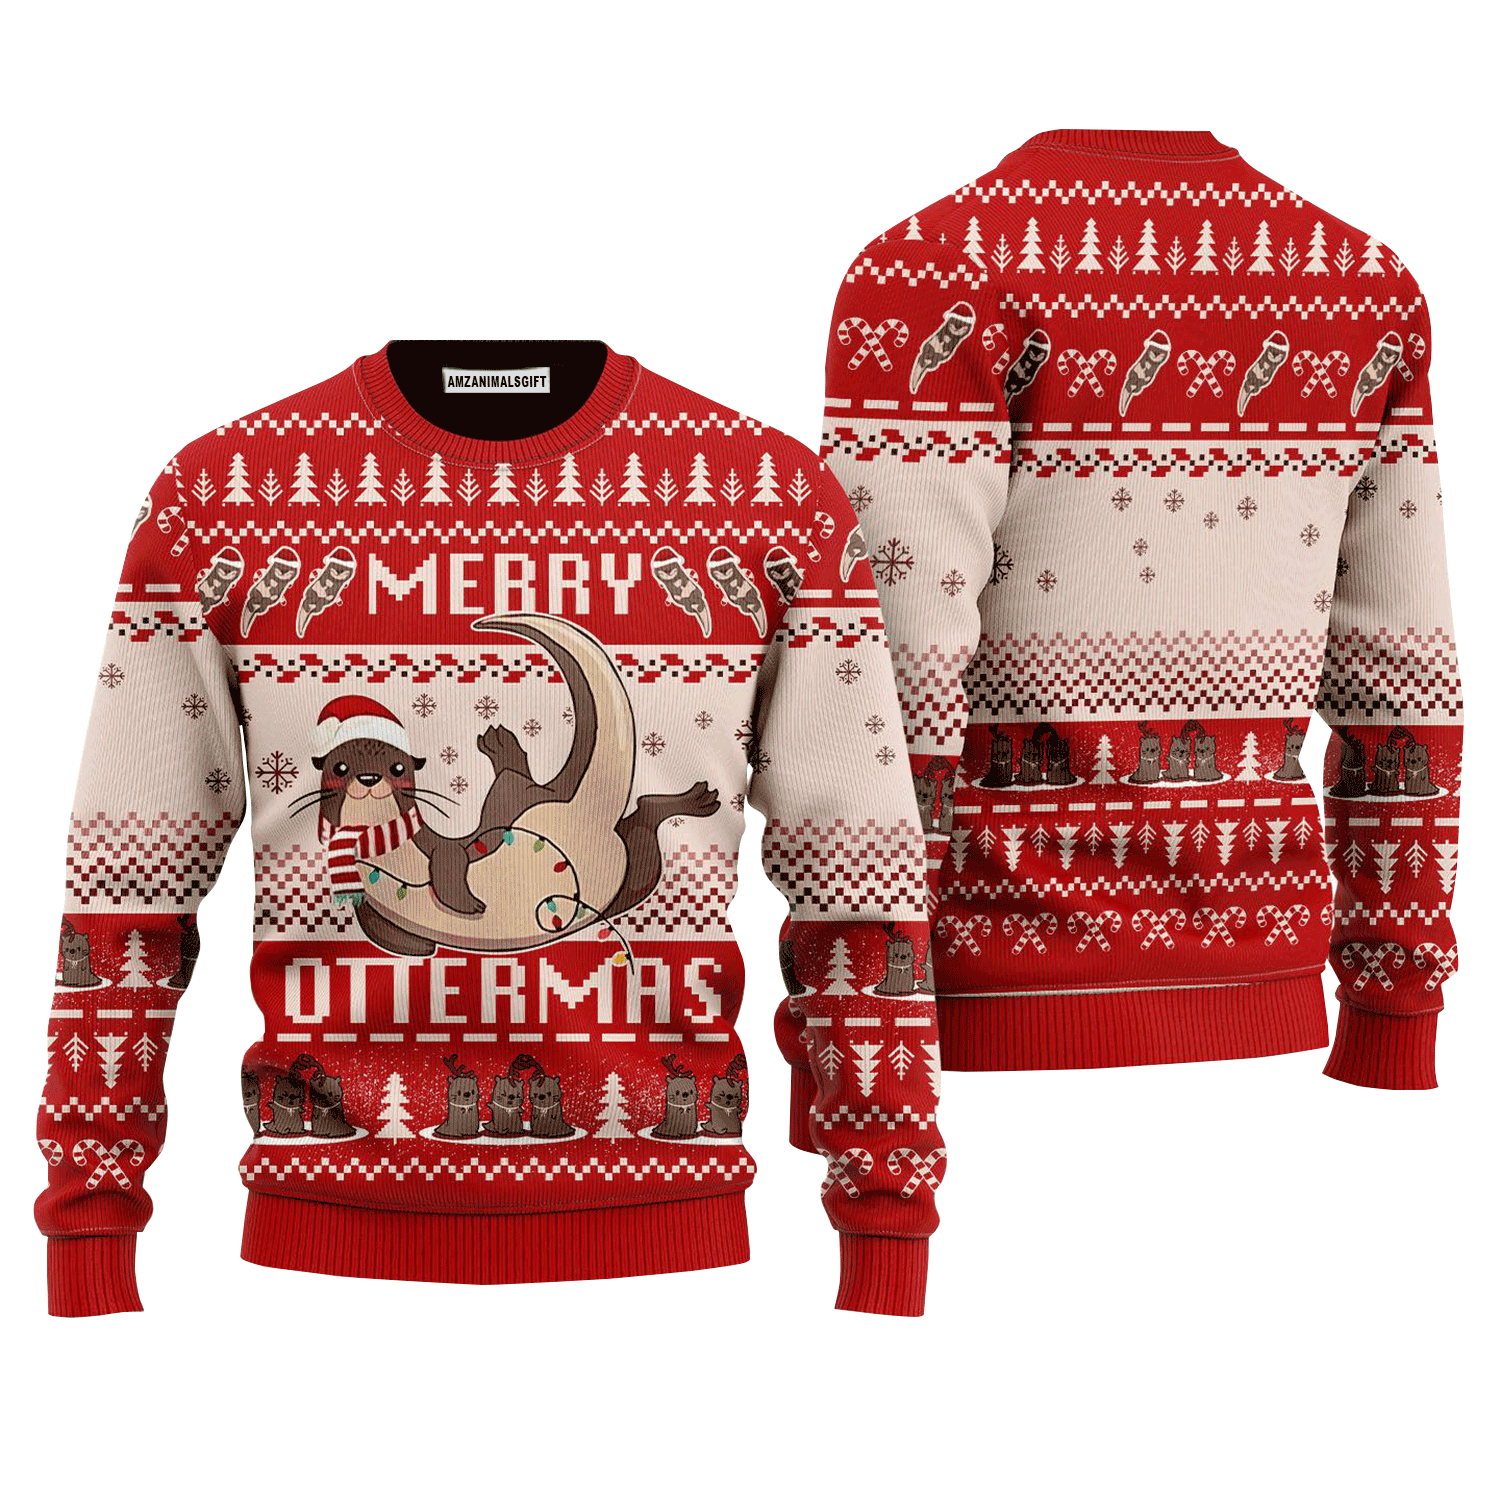 Merry Ottermas Sweater Christmas, Ugly Sweater For Men & Women, Perfect Outfit For Christmas New Year Autumn Winter